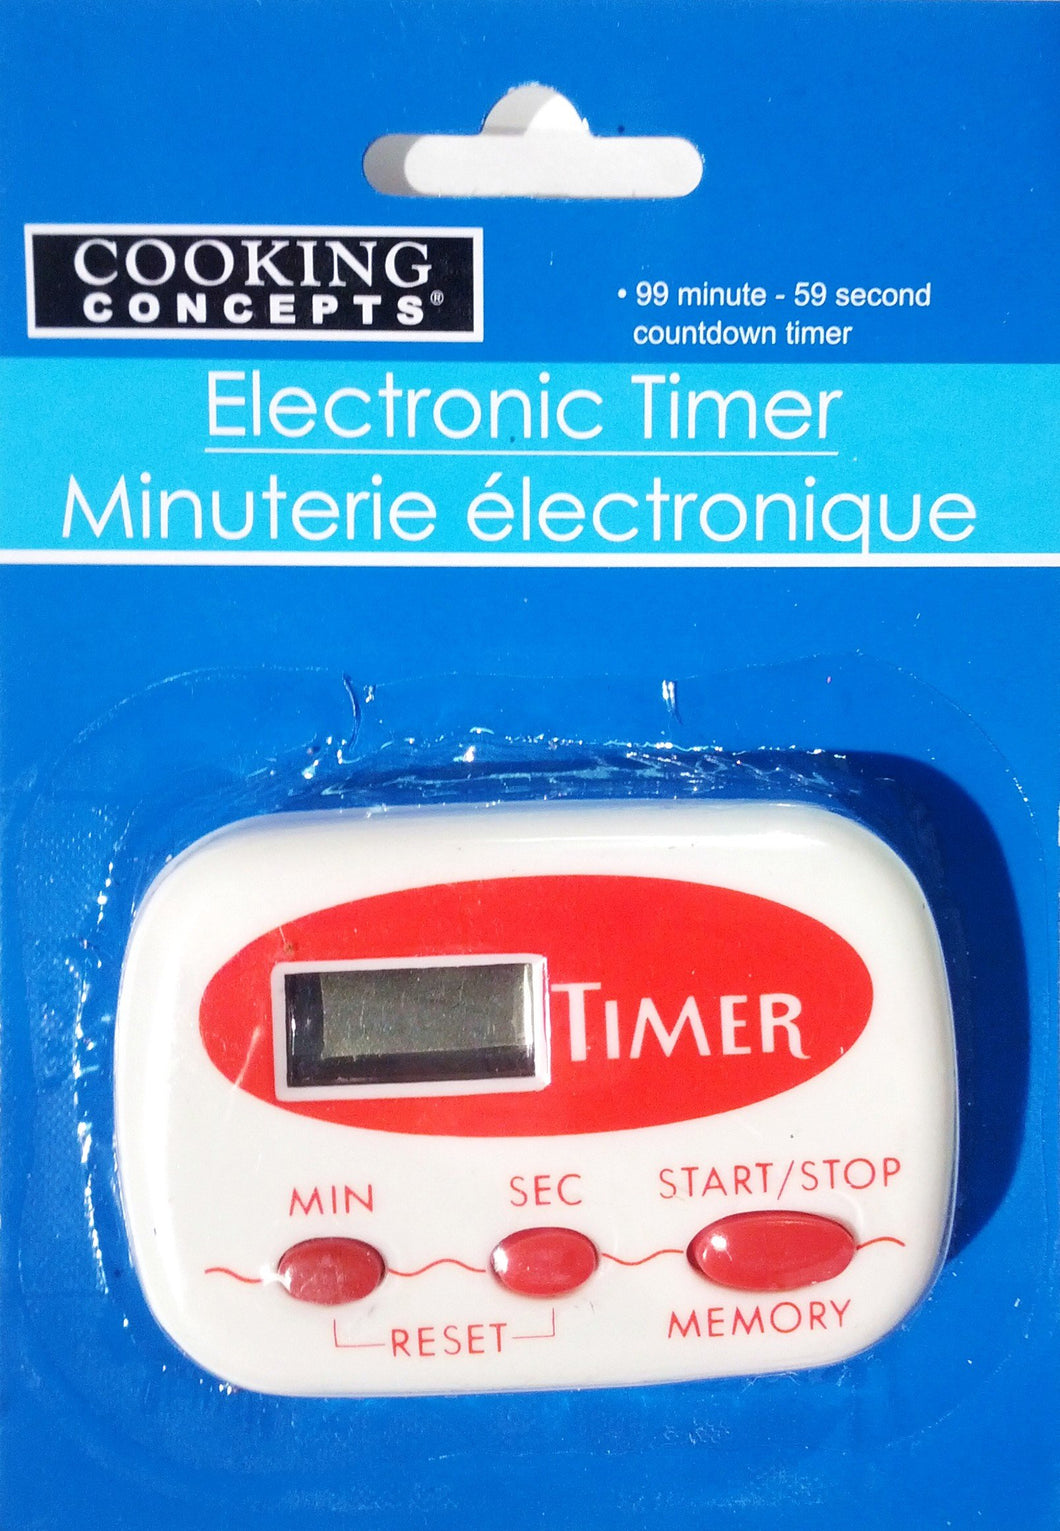 Cooking concepts - electronic timer